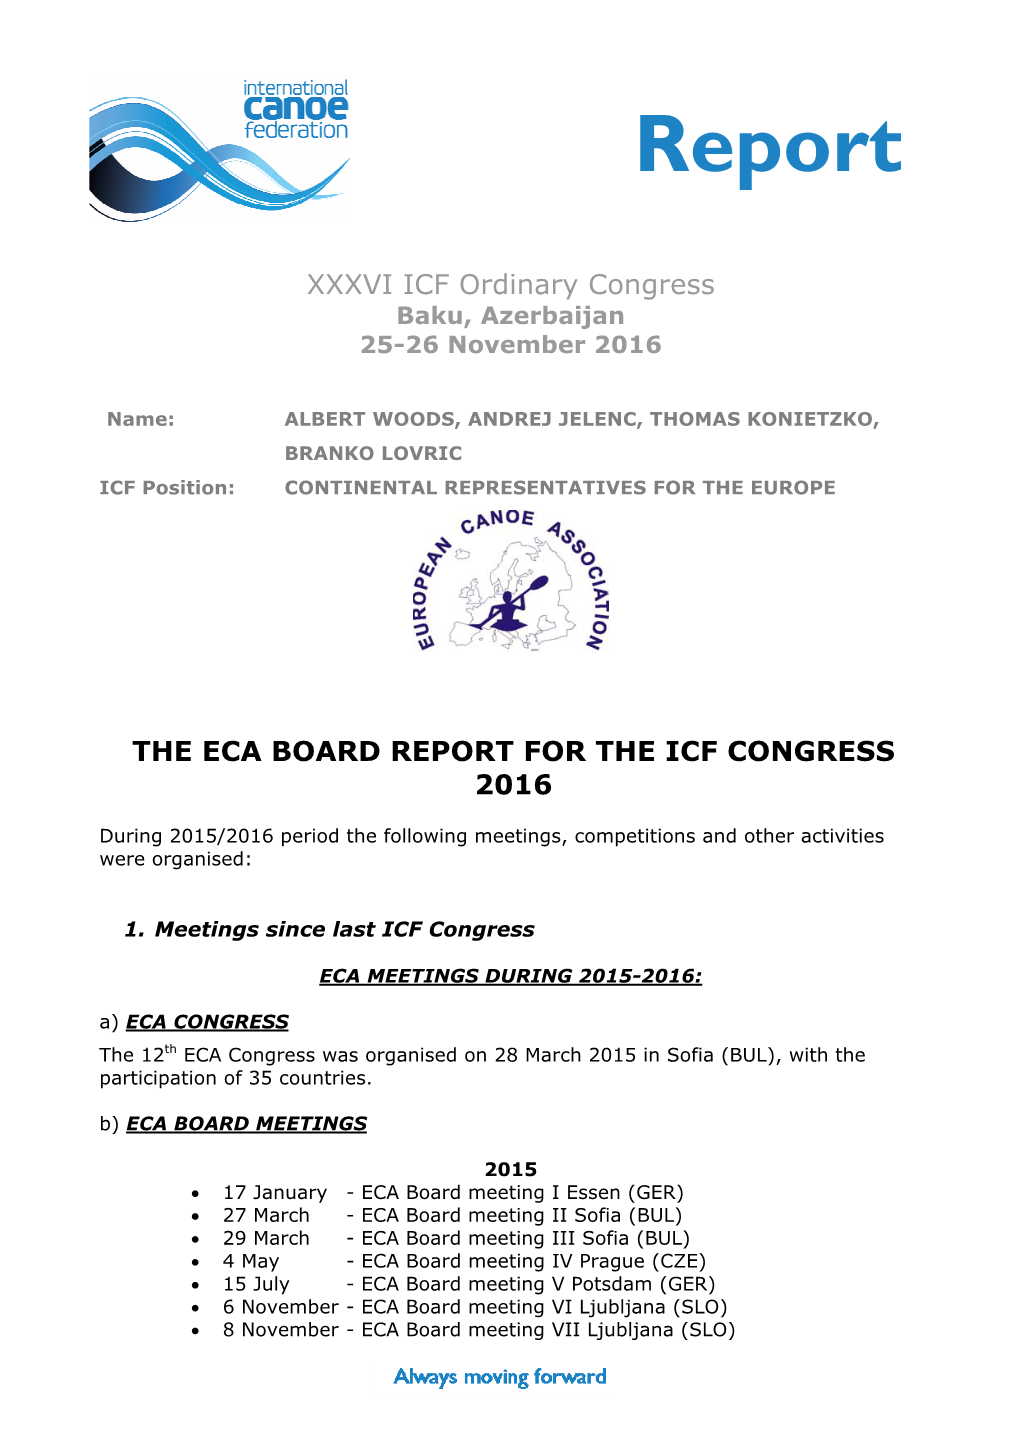 The Eca Board Report for the Icf Congress 2016